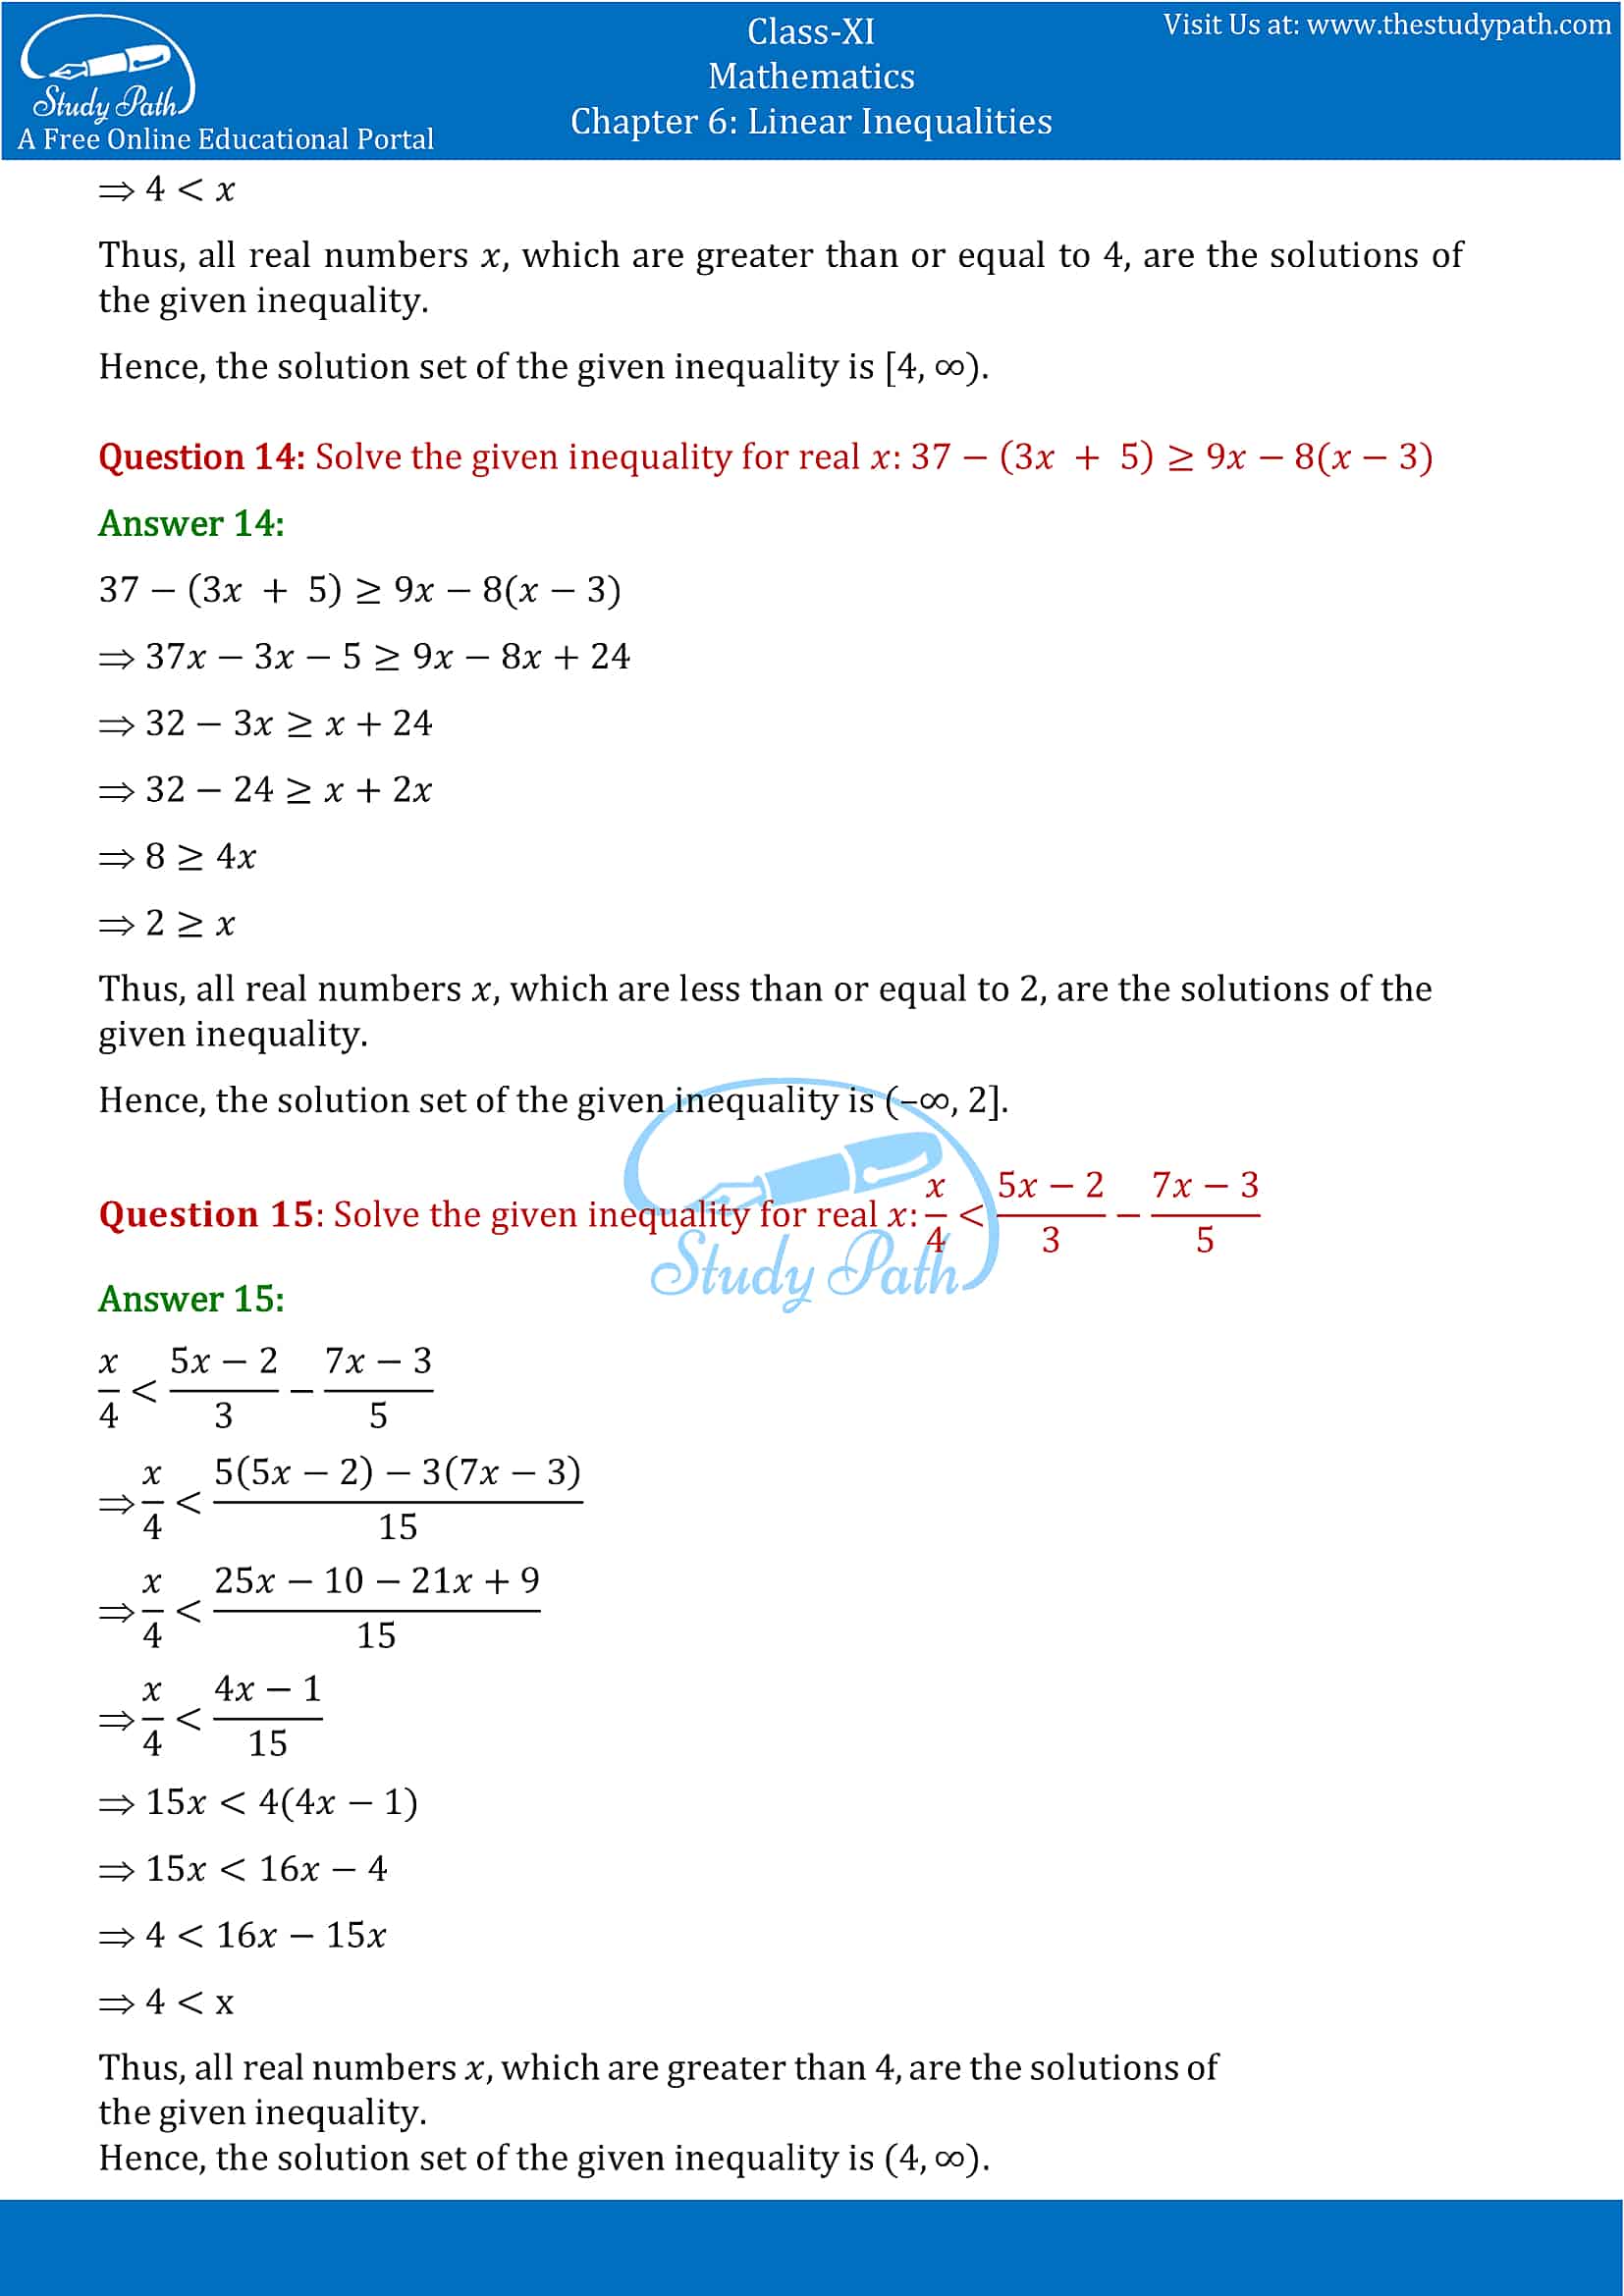 NCERT Solutions for Class 11 Maths chapter 6 Linear Inequalities Exercise 6.1 Part-7